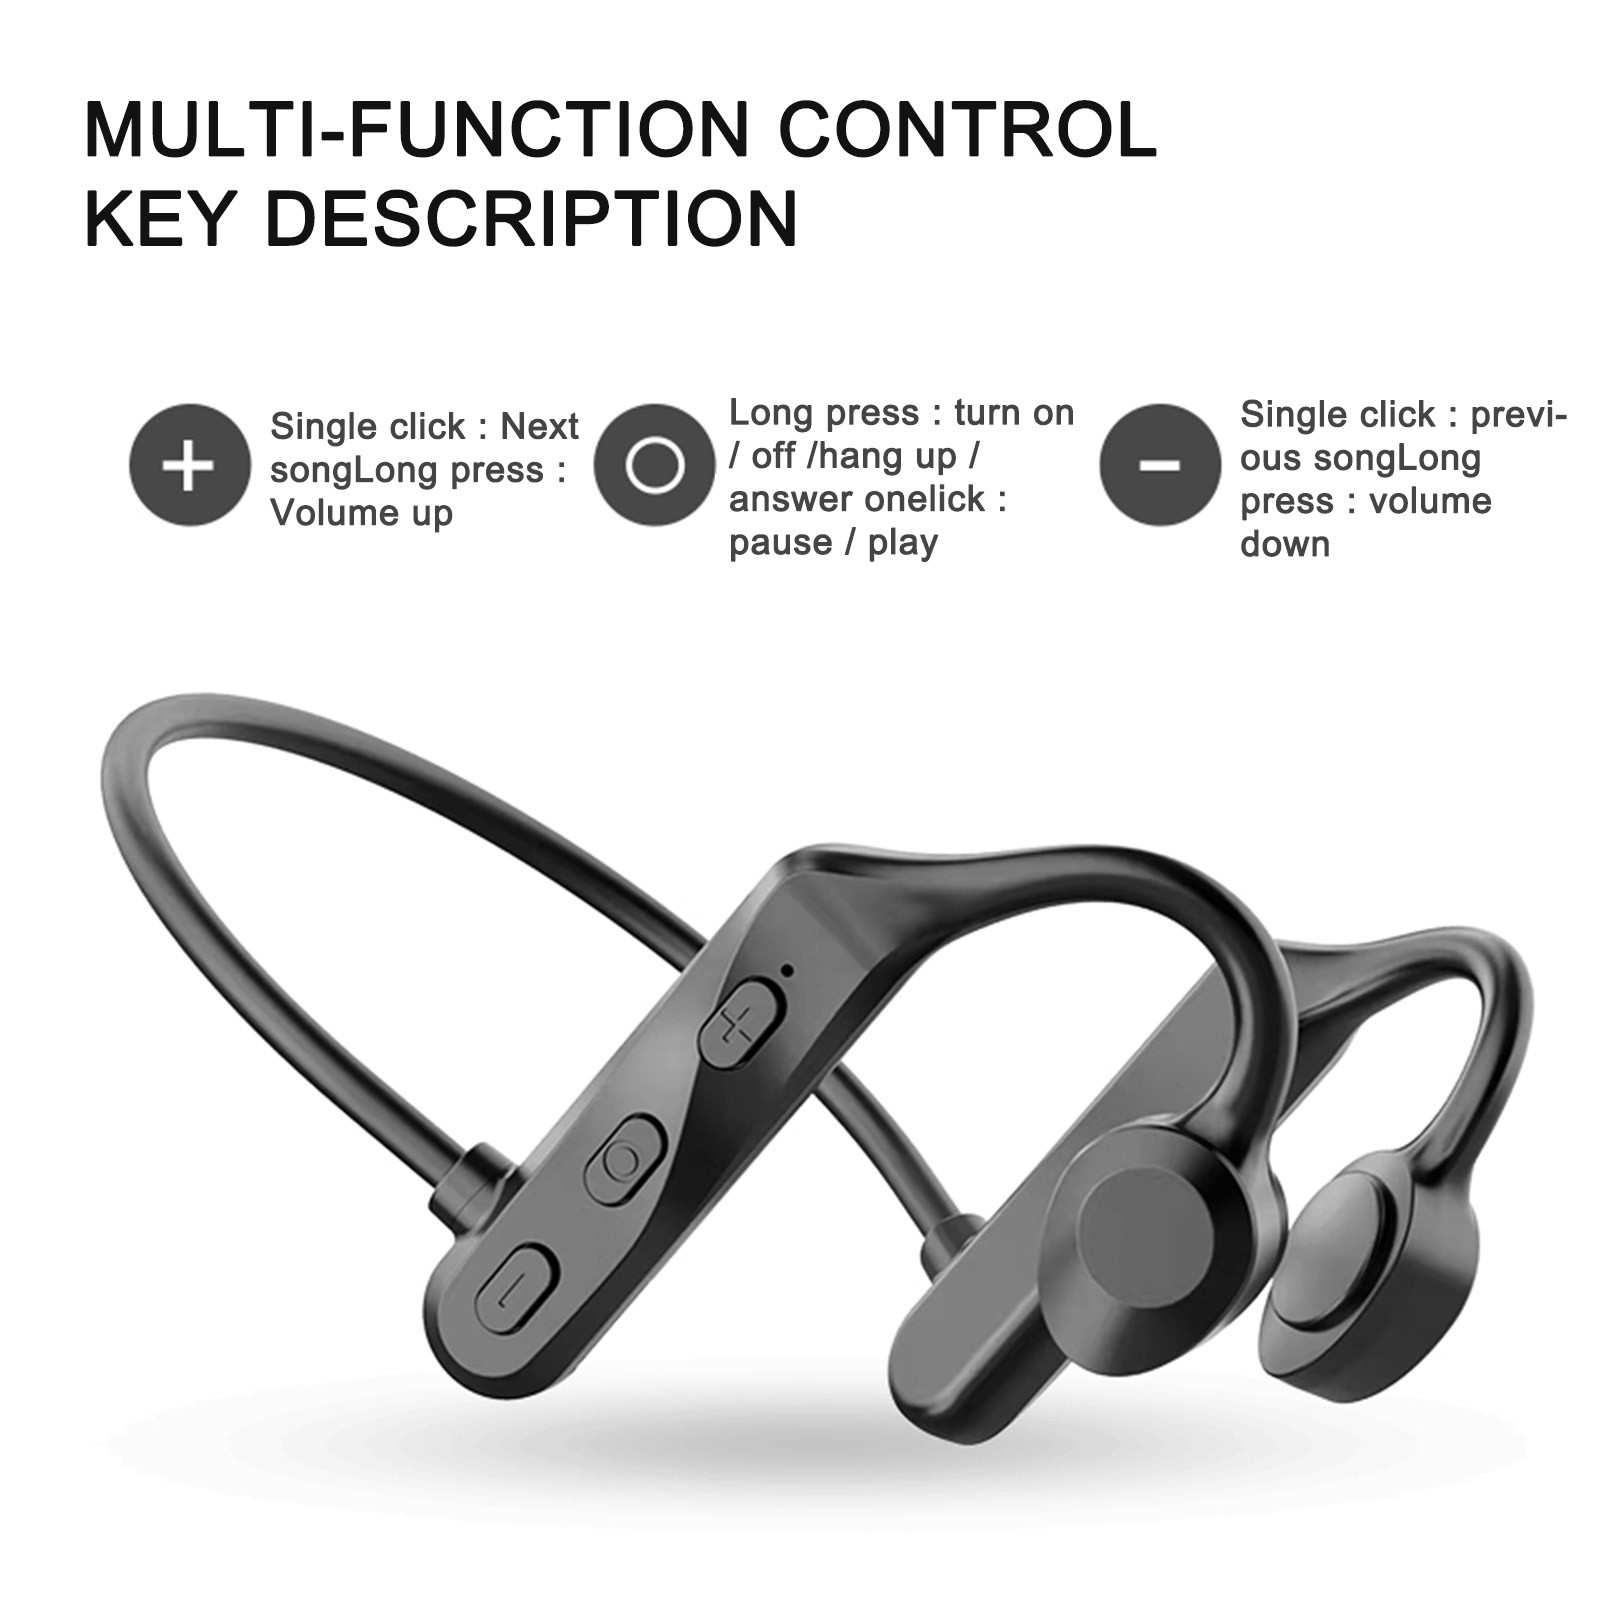 EQWLJWE True Conduction Concept Bluetooth Headset Does Not Enter The Ear, Wireless Sports, Comfortable To Wear And Waterproof Bluetooth Headset Holiday Clearance - image 2 of 2